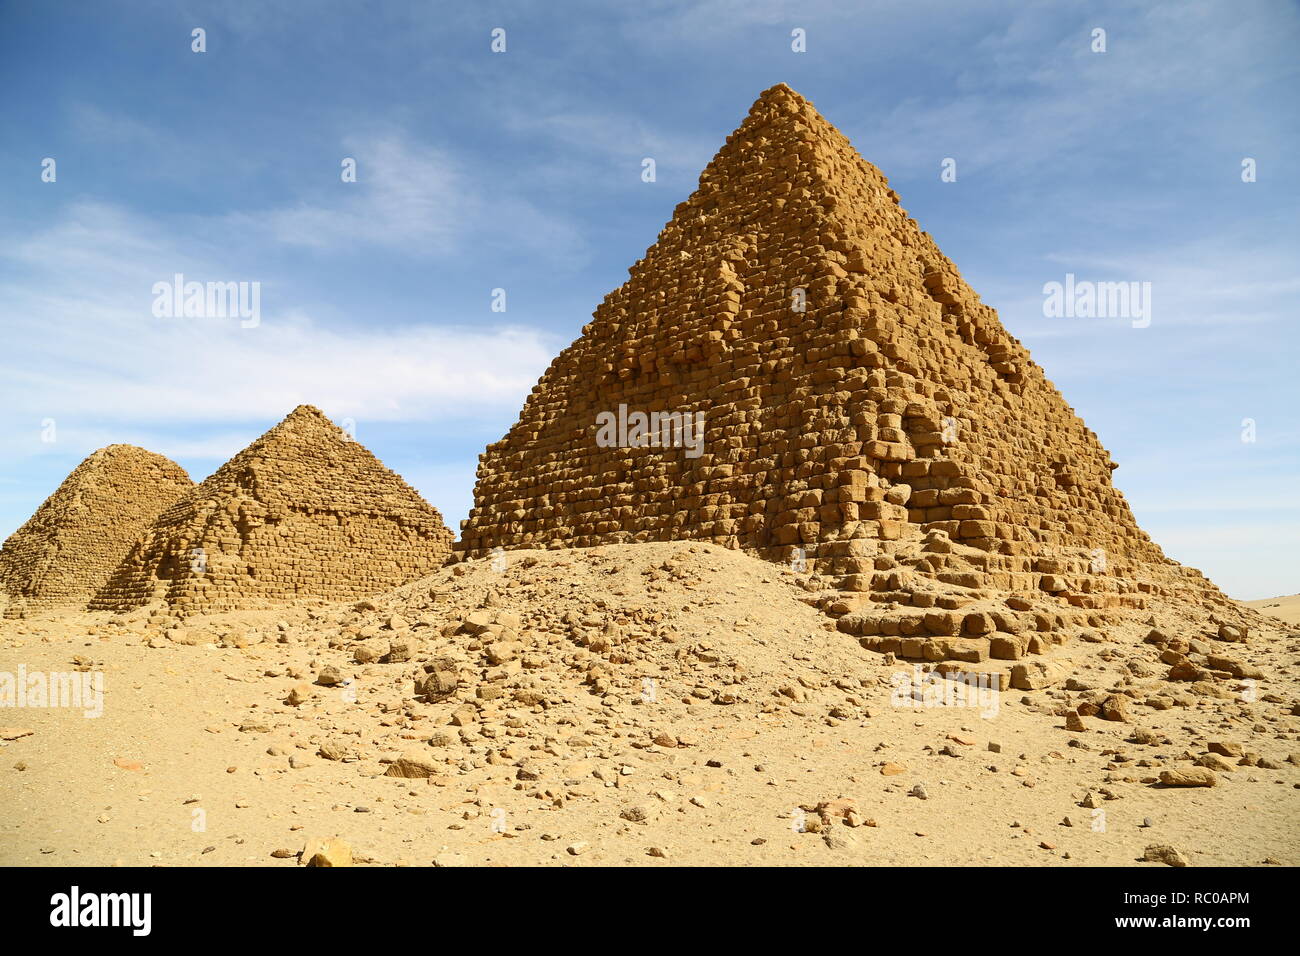 in africa sudan napata karima the antique pyramids of the black pharaohs in the middle of the desert Stock Photo